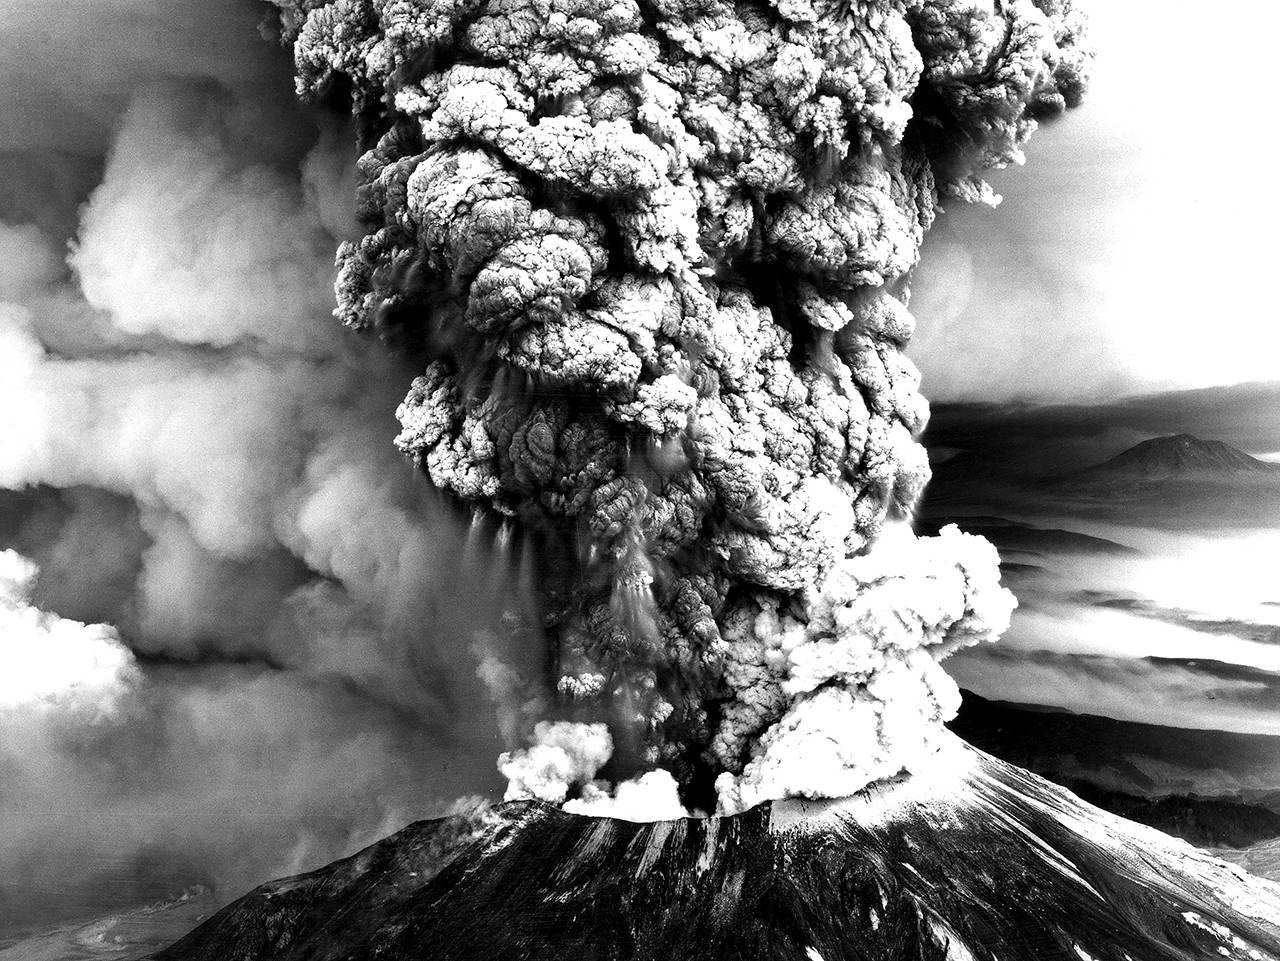 The Mount St. Helens eruption 40 years ago, on May 18, 1980, spews ash and debris skyward. The images and memories live on as enduring aspects of Northwest history. (U.S. Geological Survey photo)